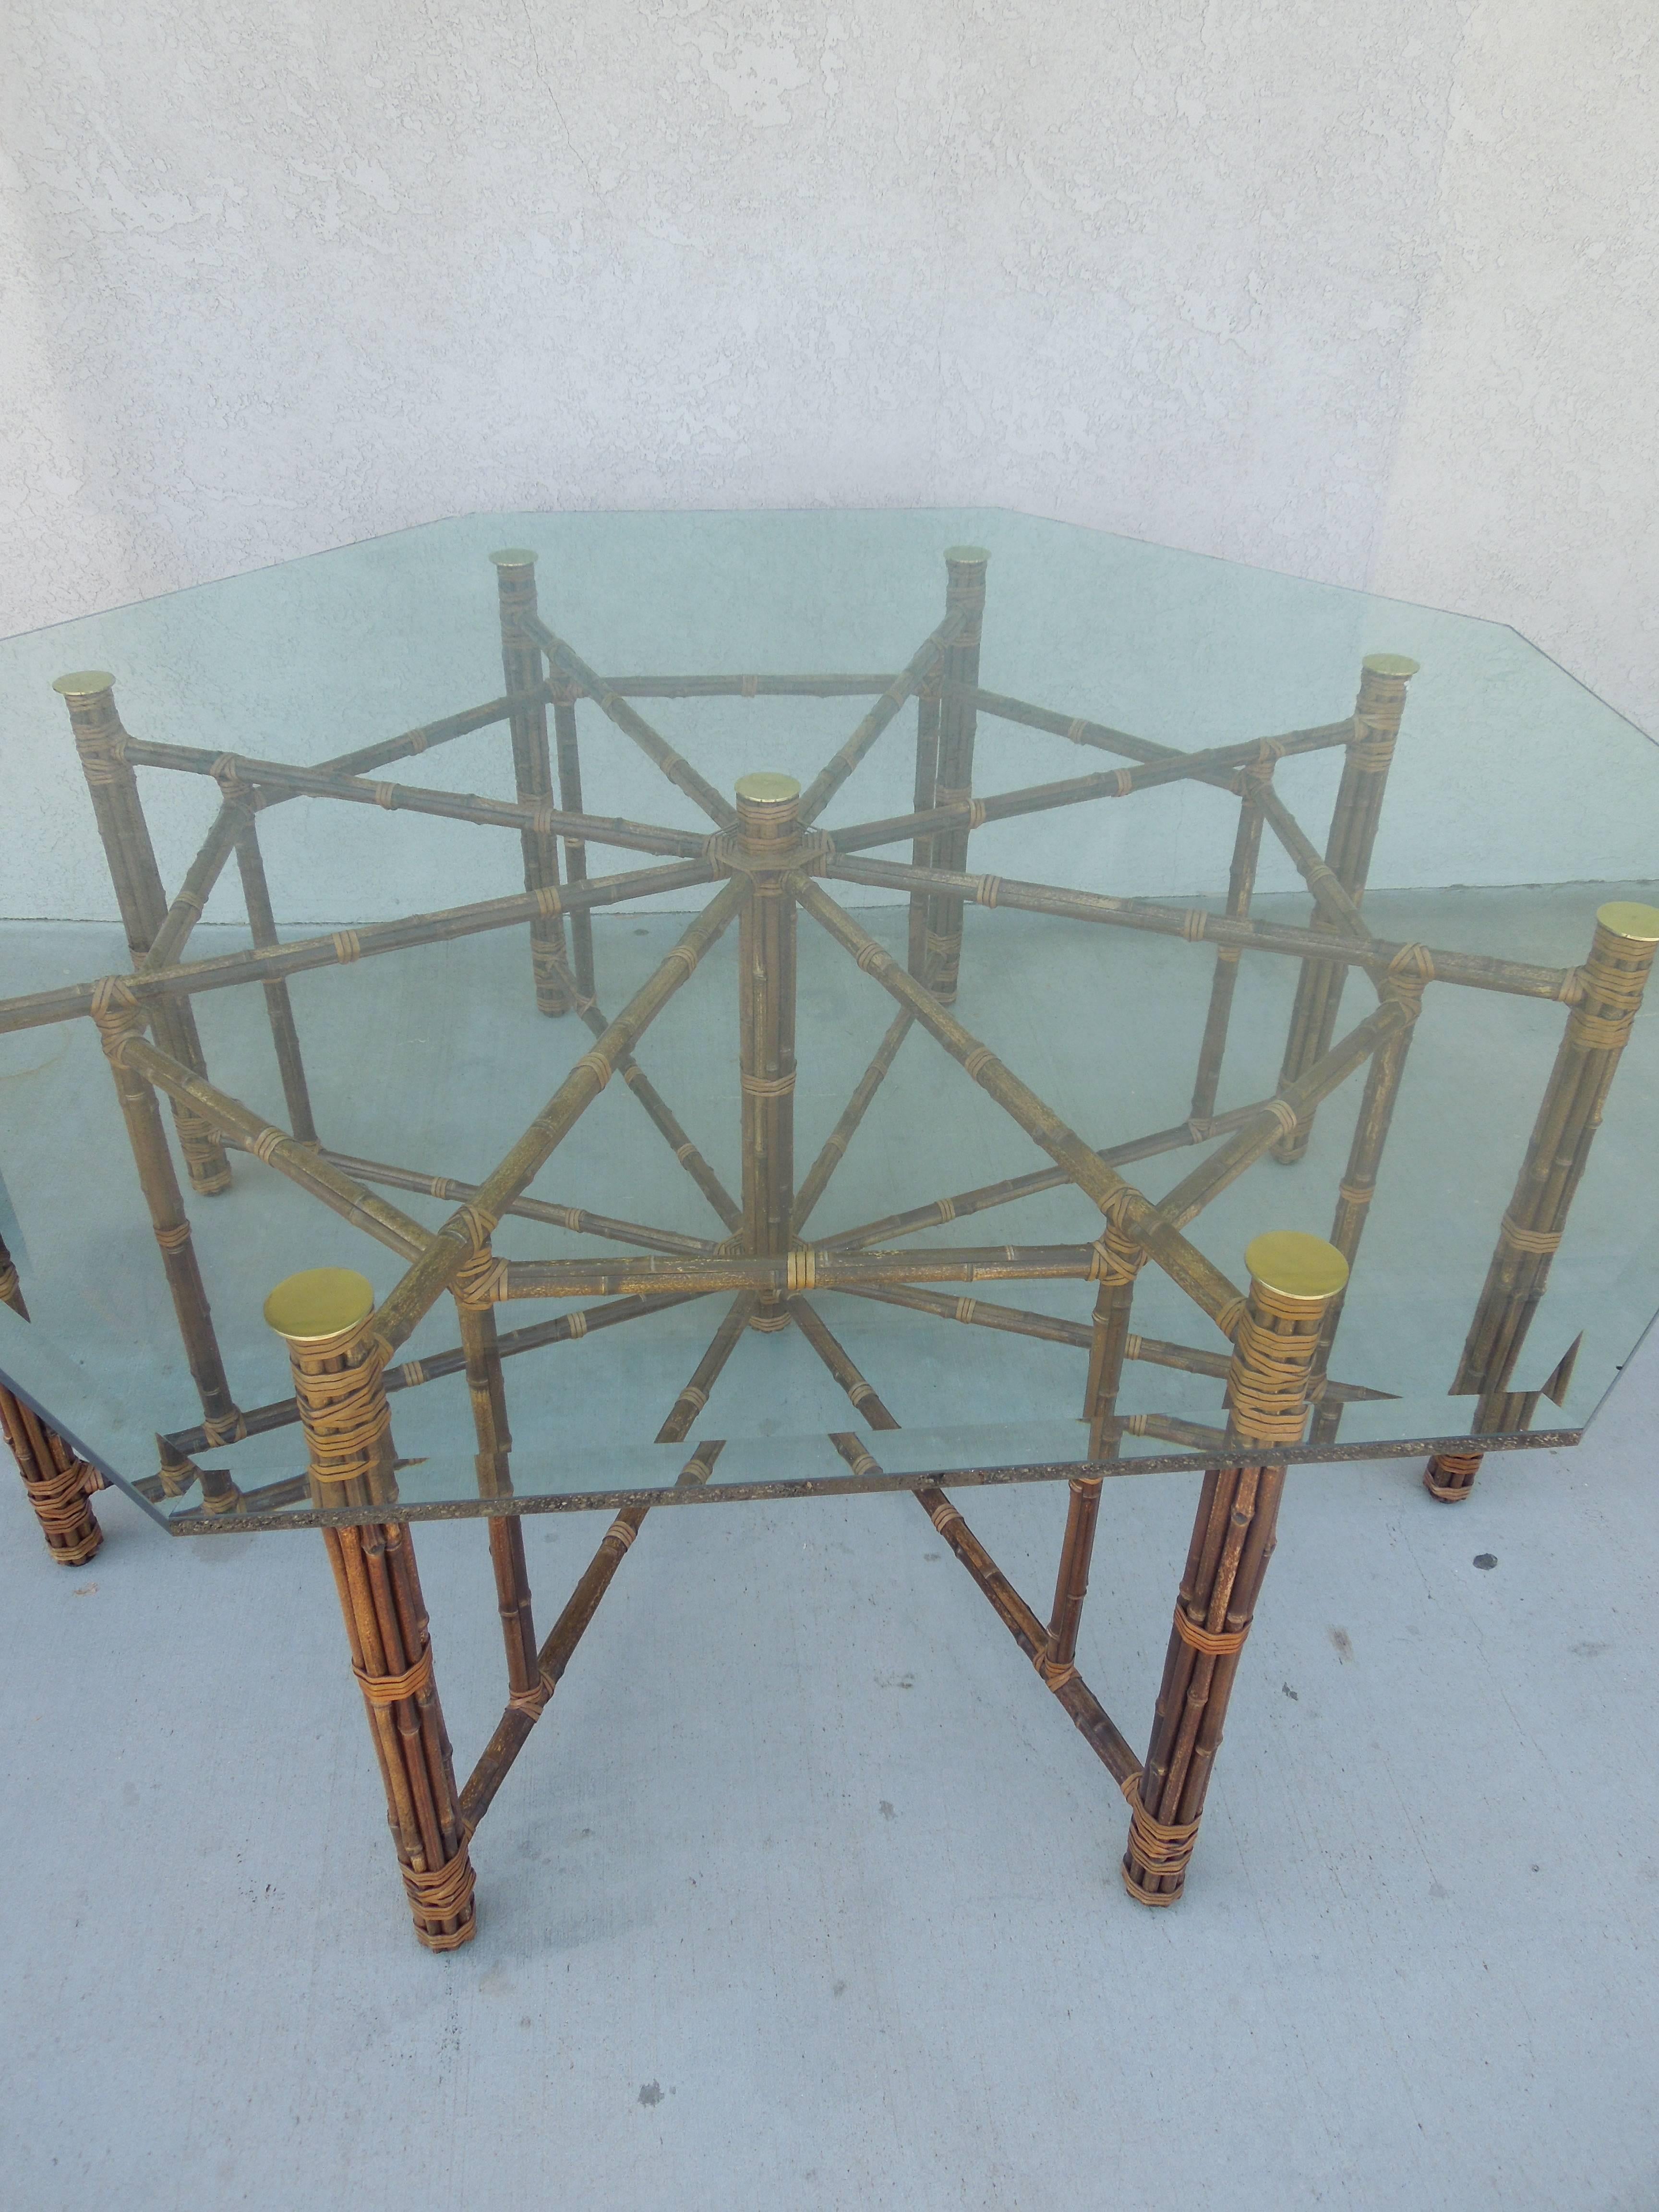 This large hexagonal dining table, designed by John McGuire, features bamboo poles lashed in place with McGuire's signature rawhide laces. A glass top reveals a center support of bundled bamboo. Horizontal bamboo members radiate from this center